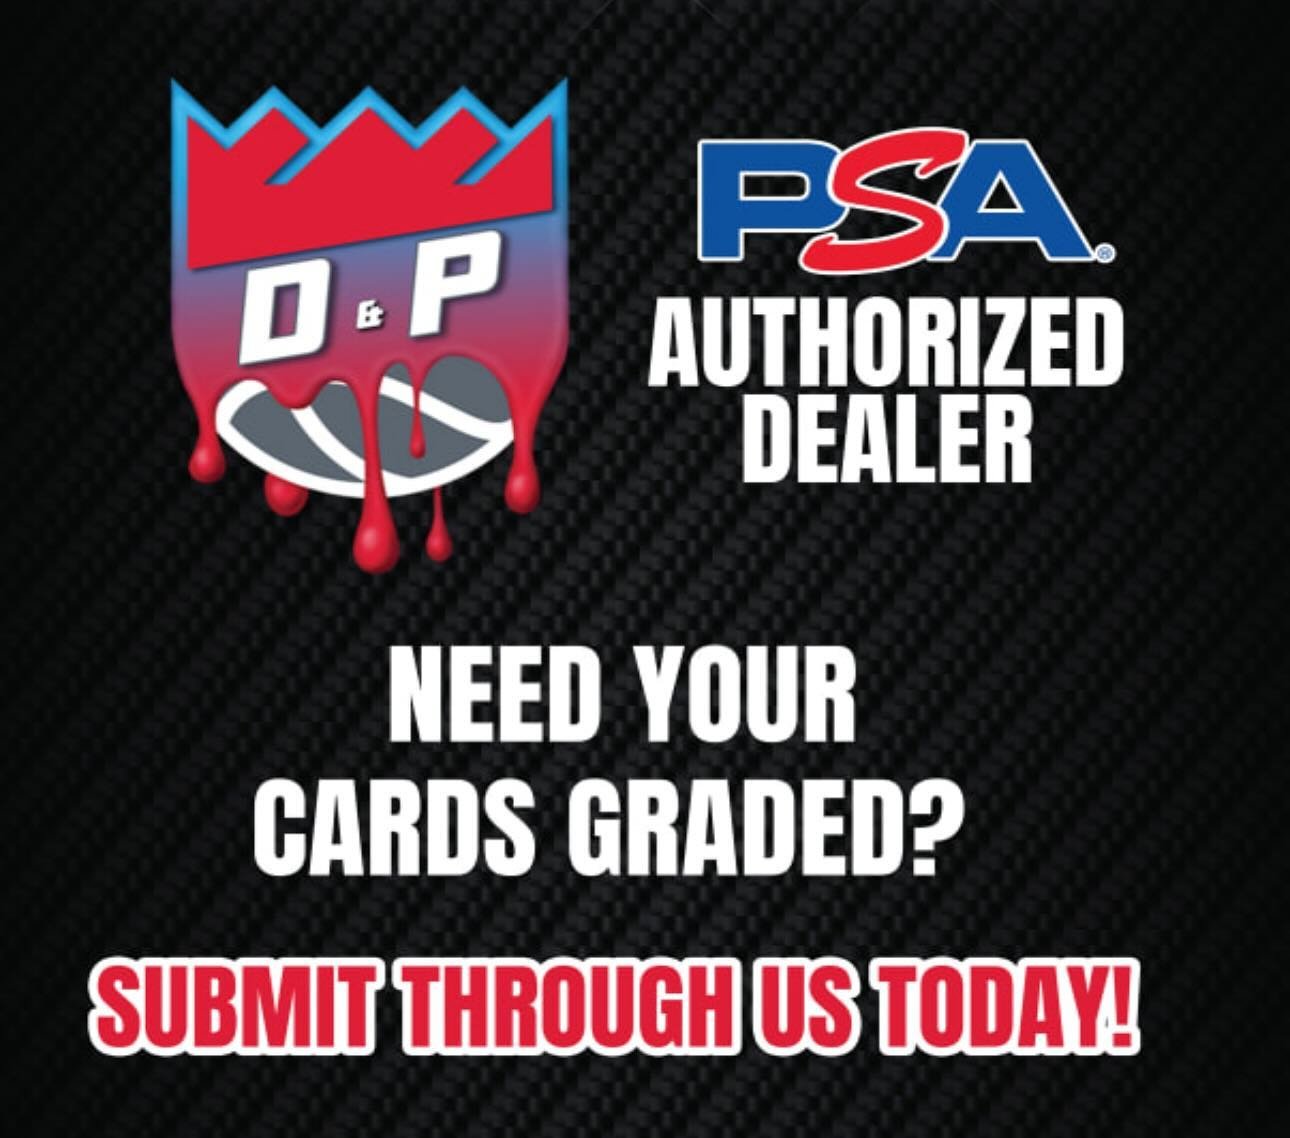 Just a Reminder! We Will be accepting PSA submissions! This is NOT For On-Site Grading! Just regular take home submissions so there&rsquo;s no Confusion! We will have a booth taking subs so bring us your cards!